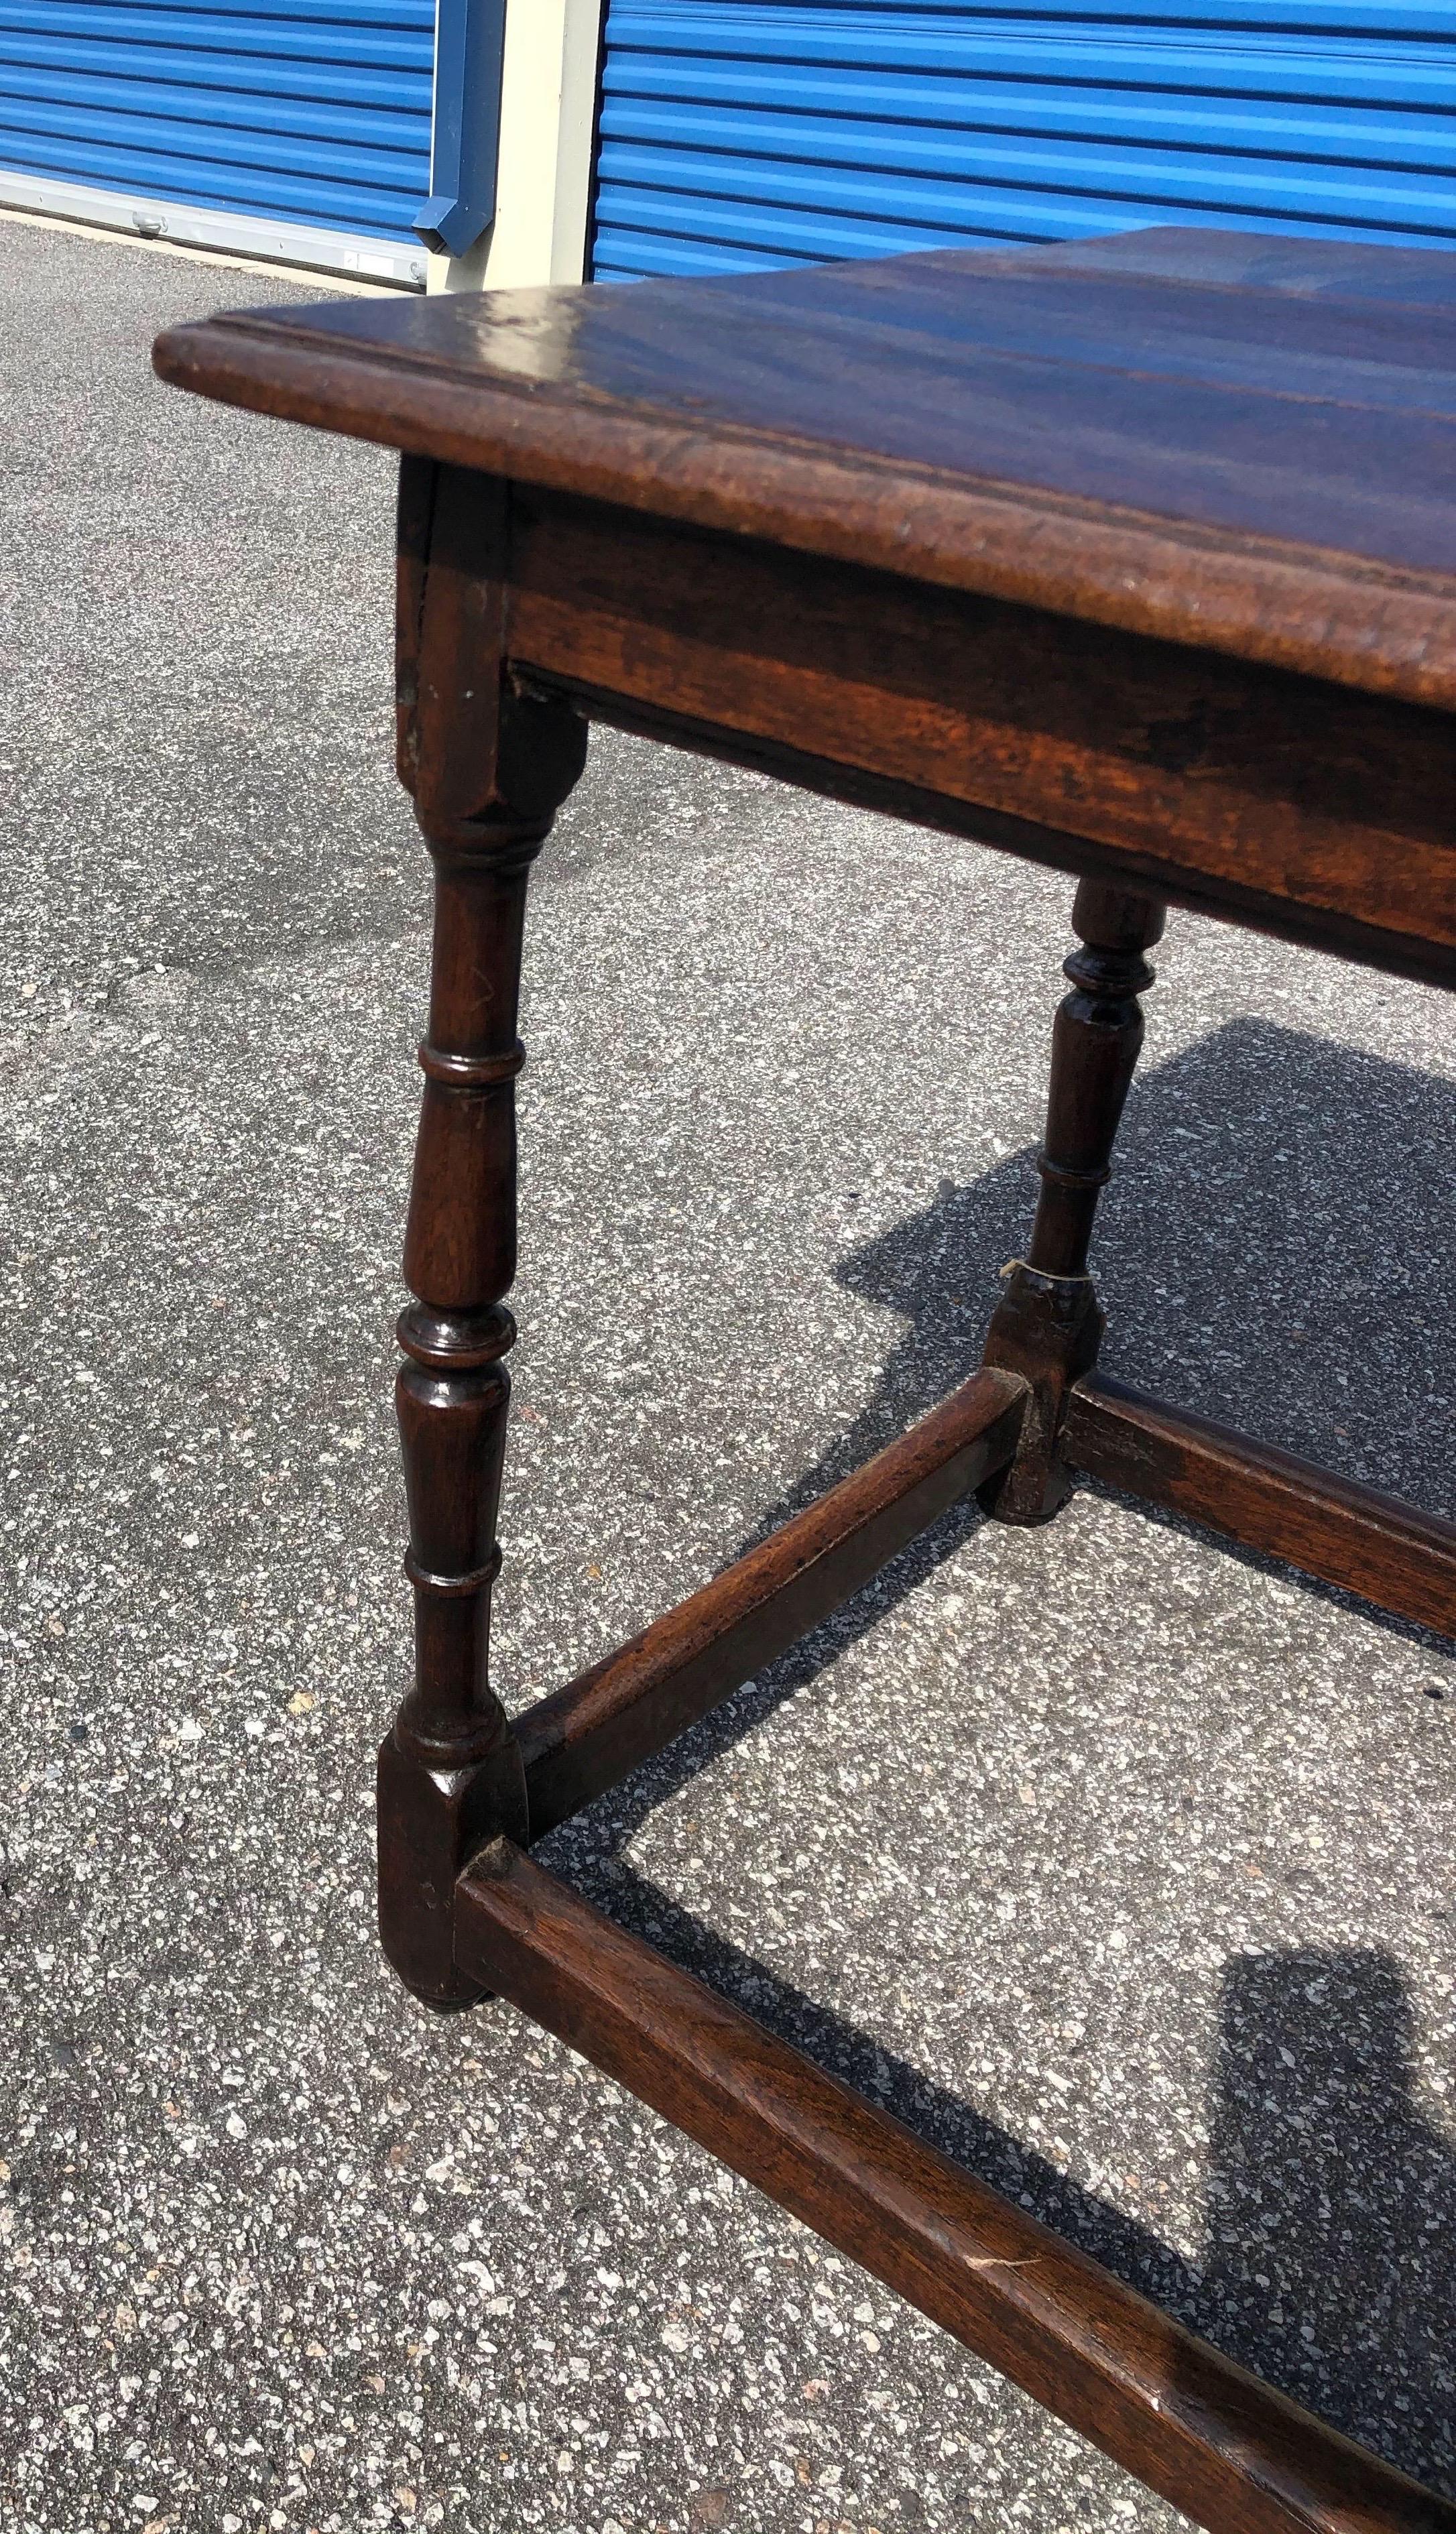 Great little 18th century welsh tavern table in oak with a box stretcher. Wonderful color and patina. Nice size.